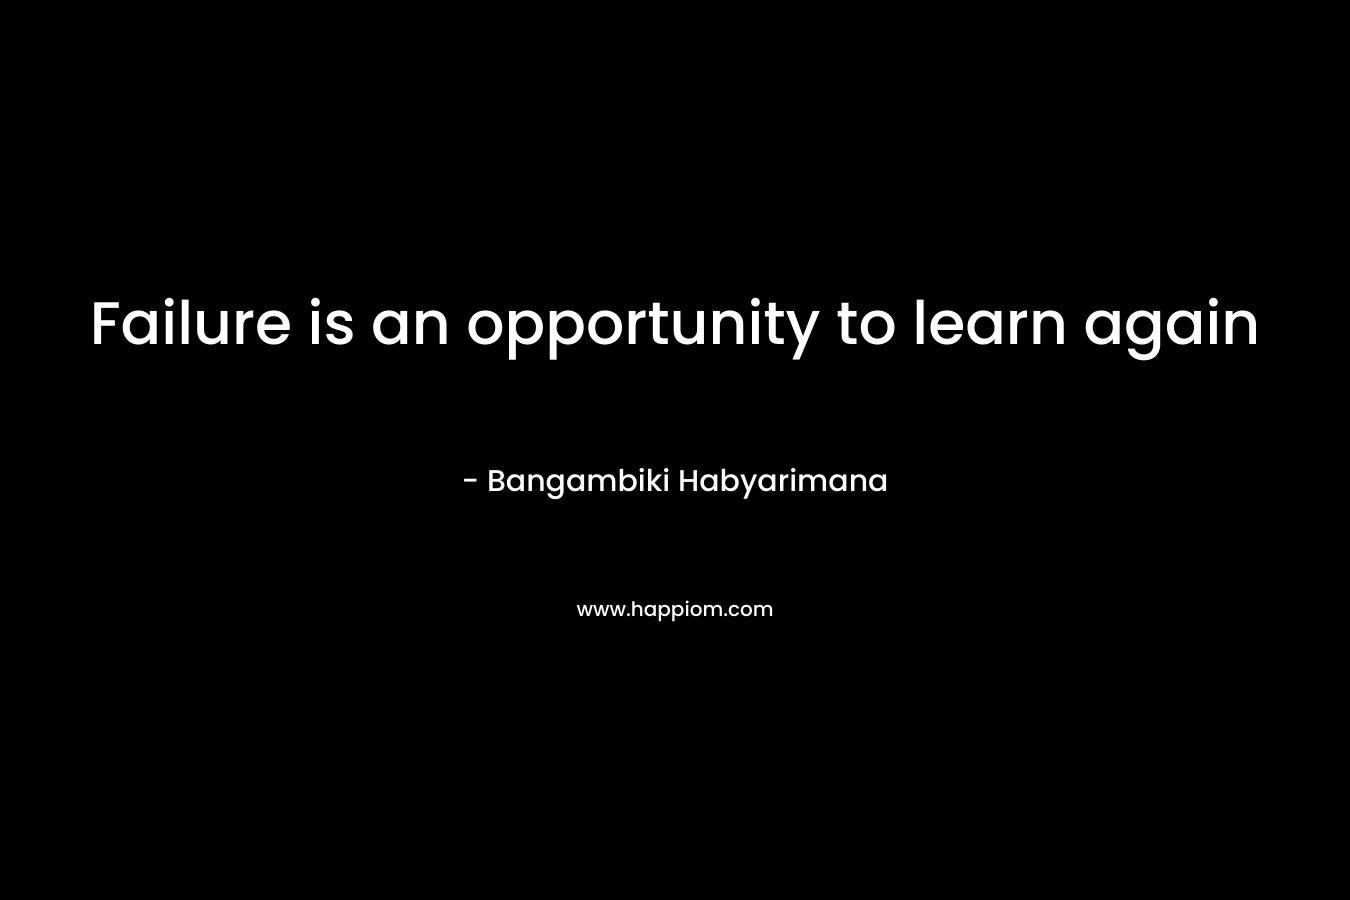 Failure is an opportunity to learn again